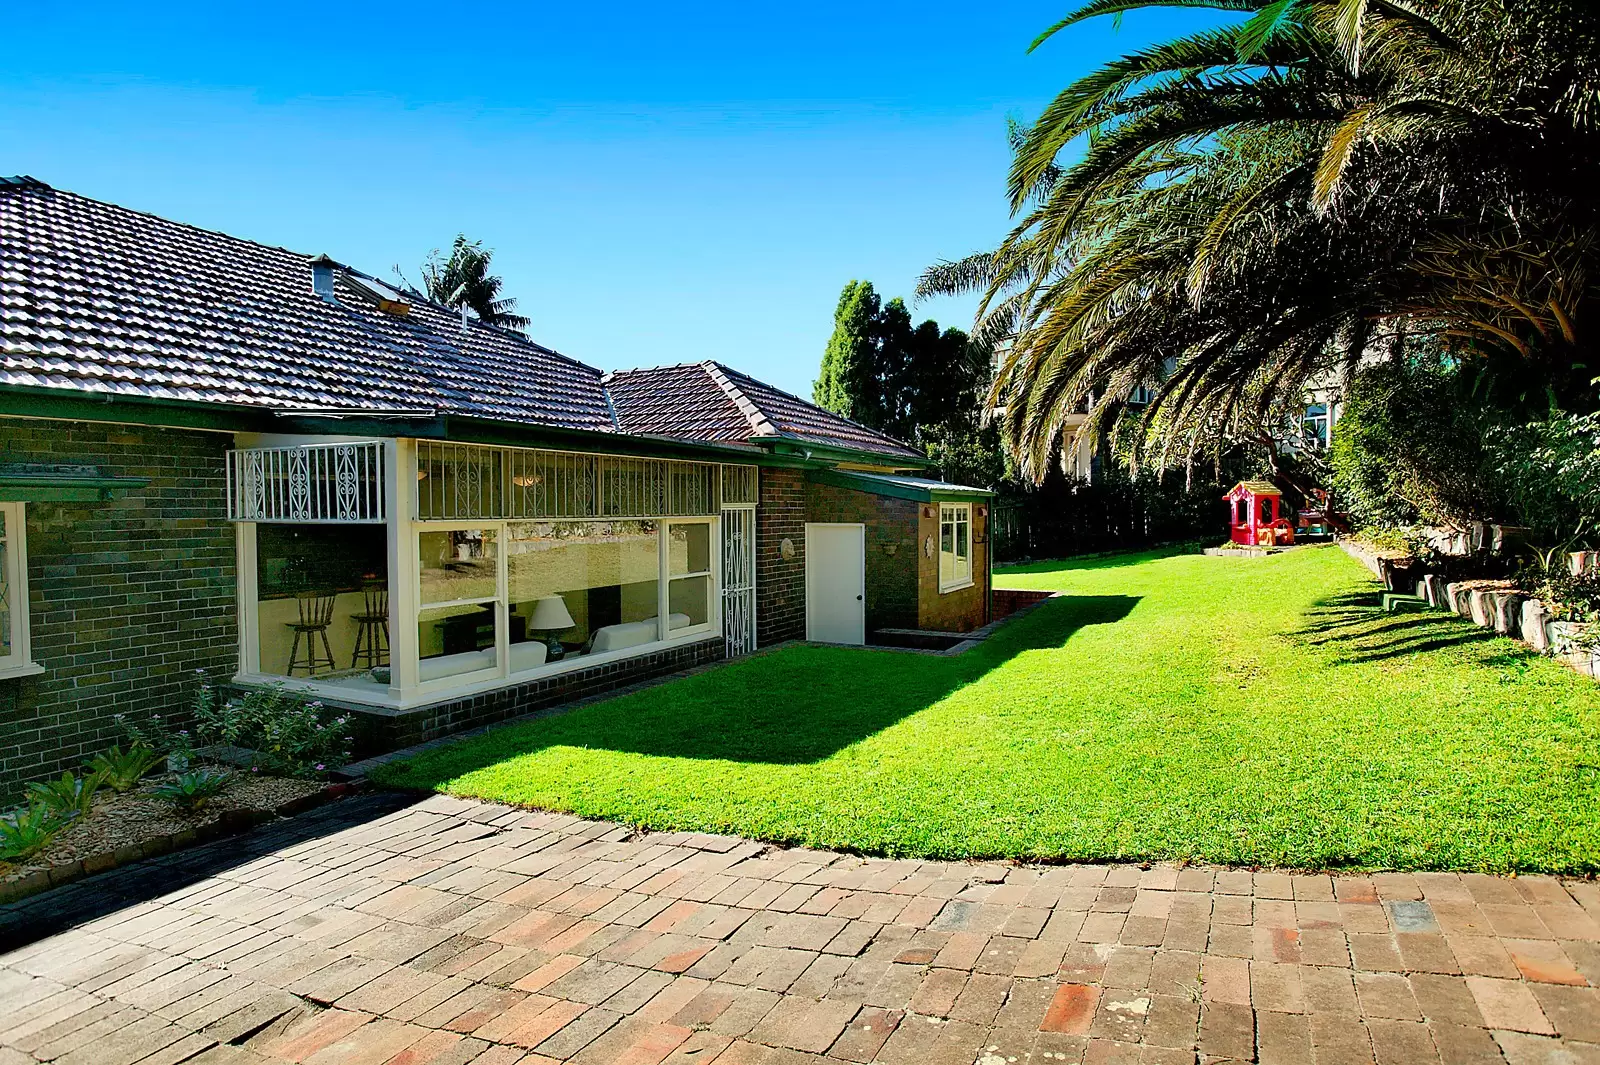 Photo #11: 15 Olphert Avenue, Vaucluse - Sold by Sydney Sotheby's International Realty